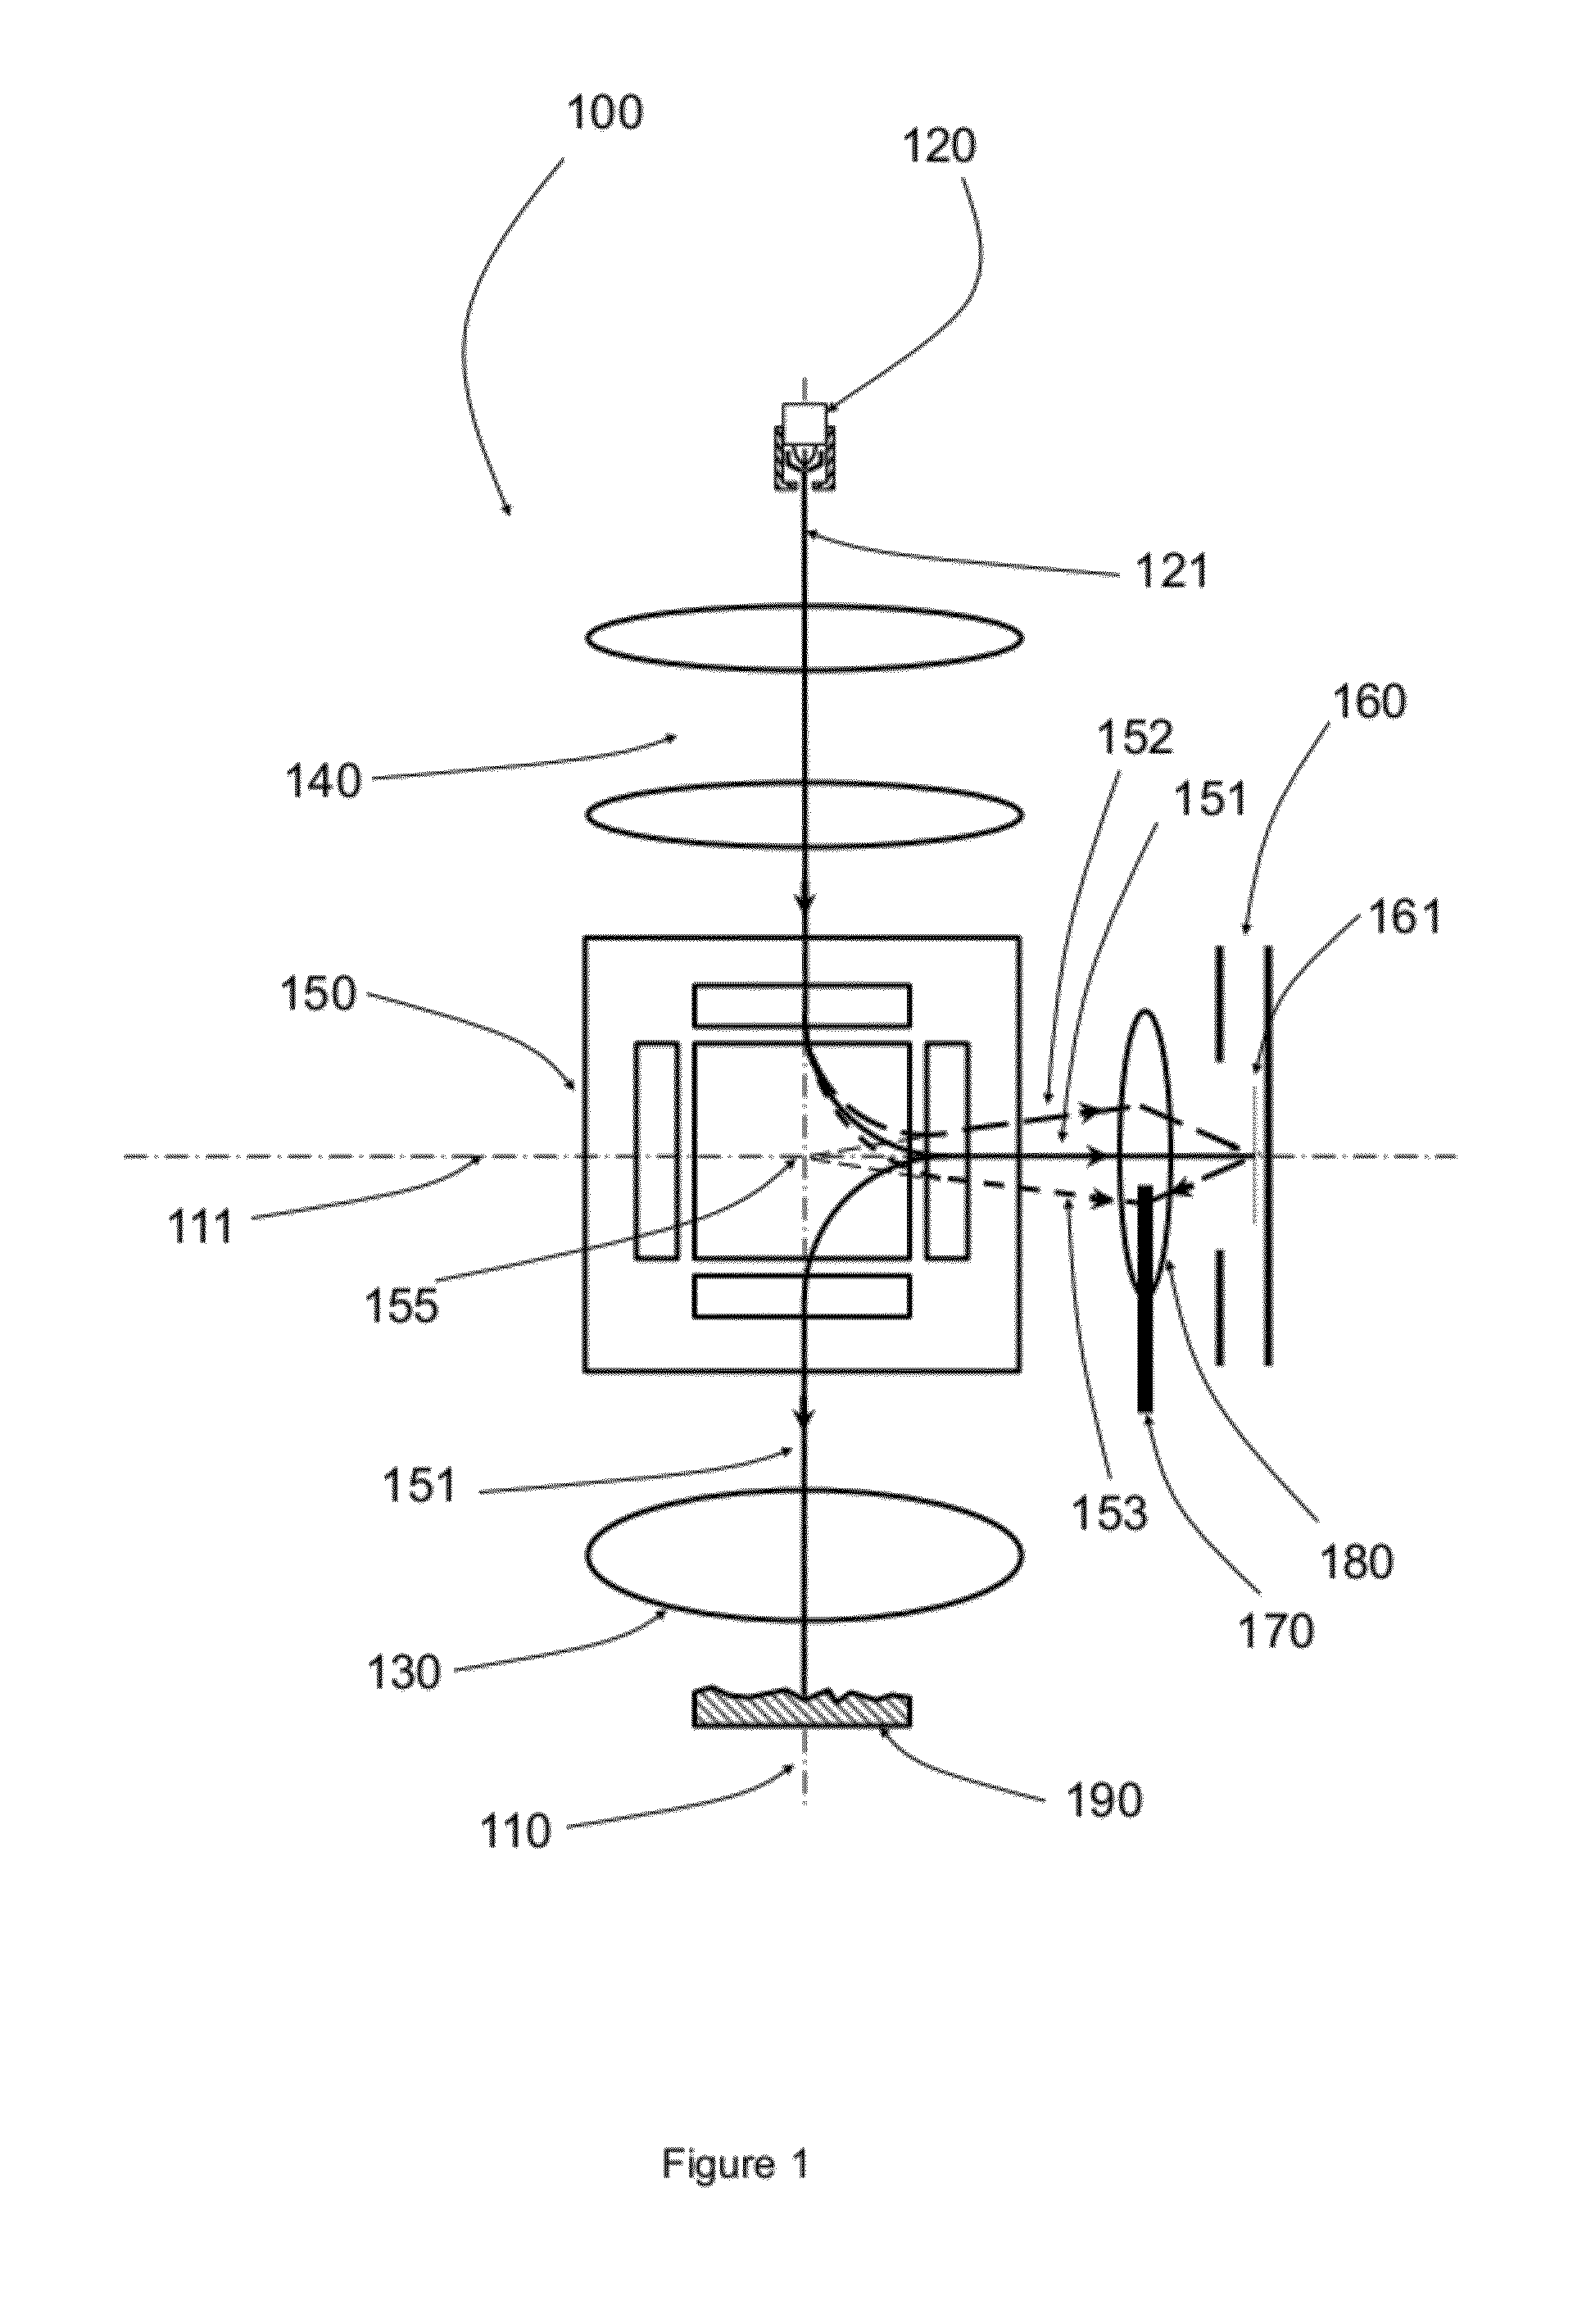 Mirror monochromator for charged particle beam apparatus